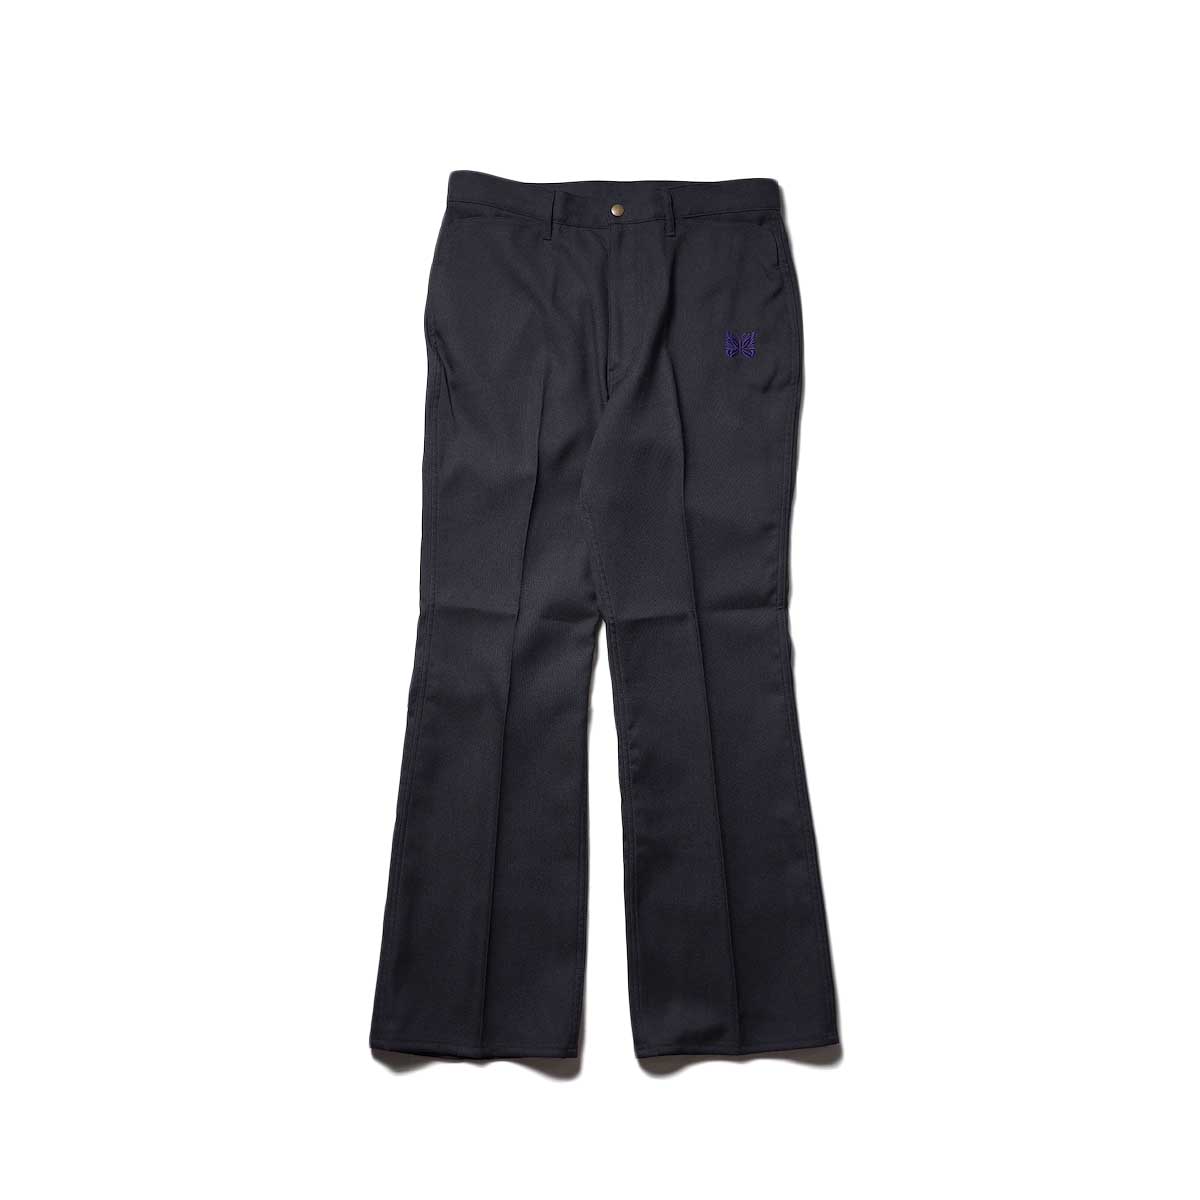 Needles / Boot-cut Jean - Poly Twill (Black)正面